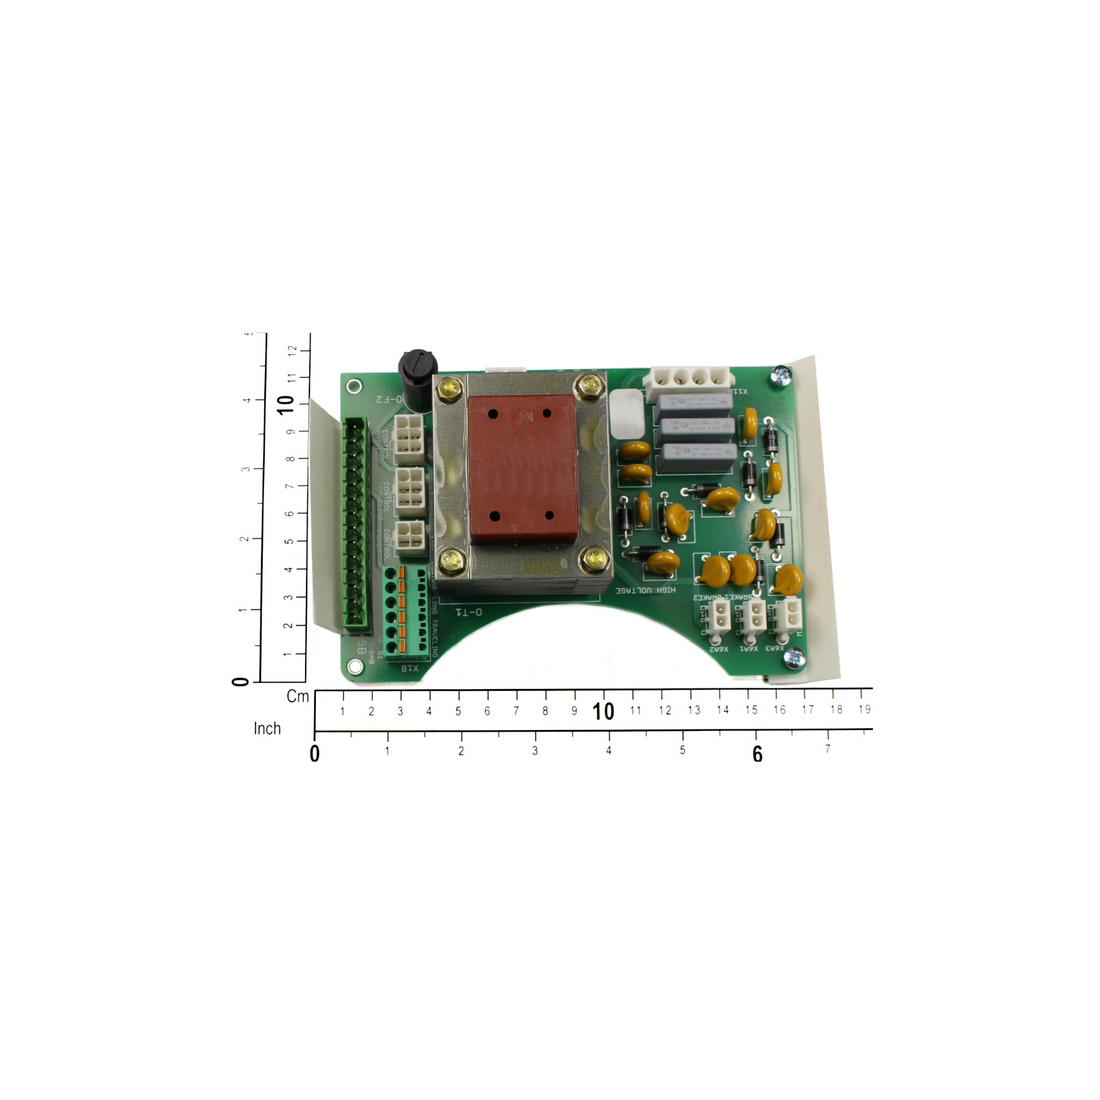 R&M Parts - Power Supply Board, Part Number: 3000007540